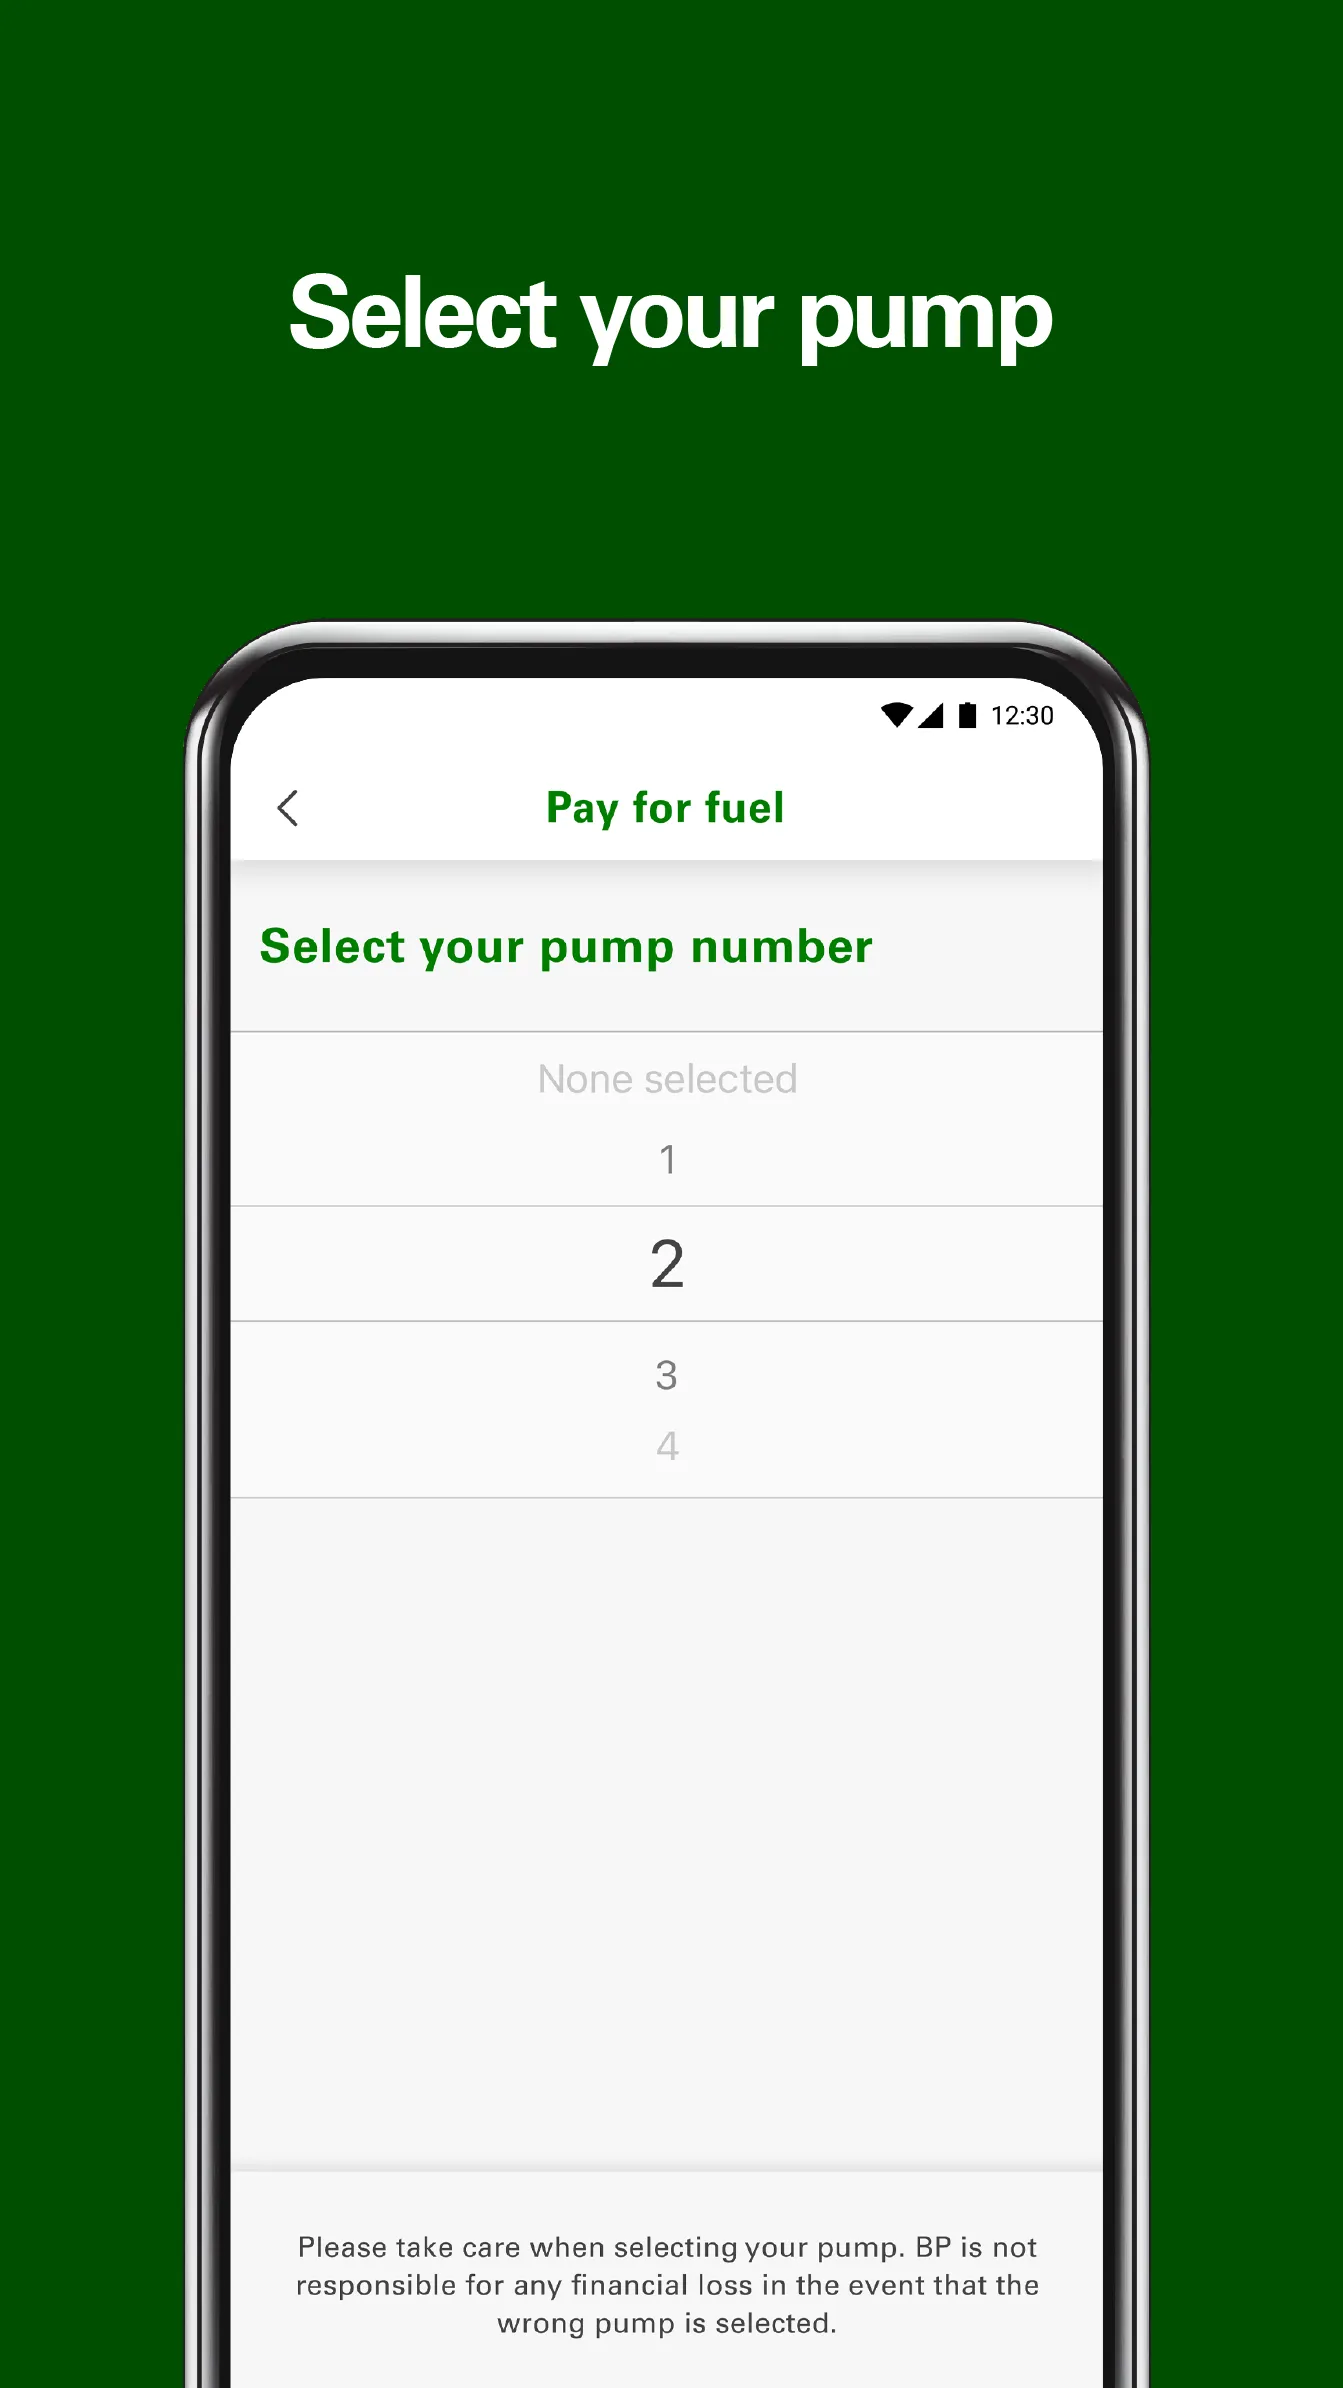 Selecting a pump to pay for gas in the BP app